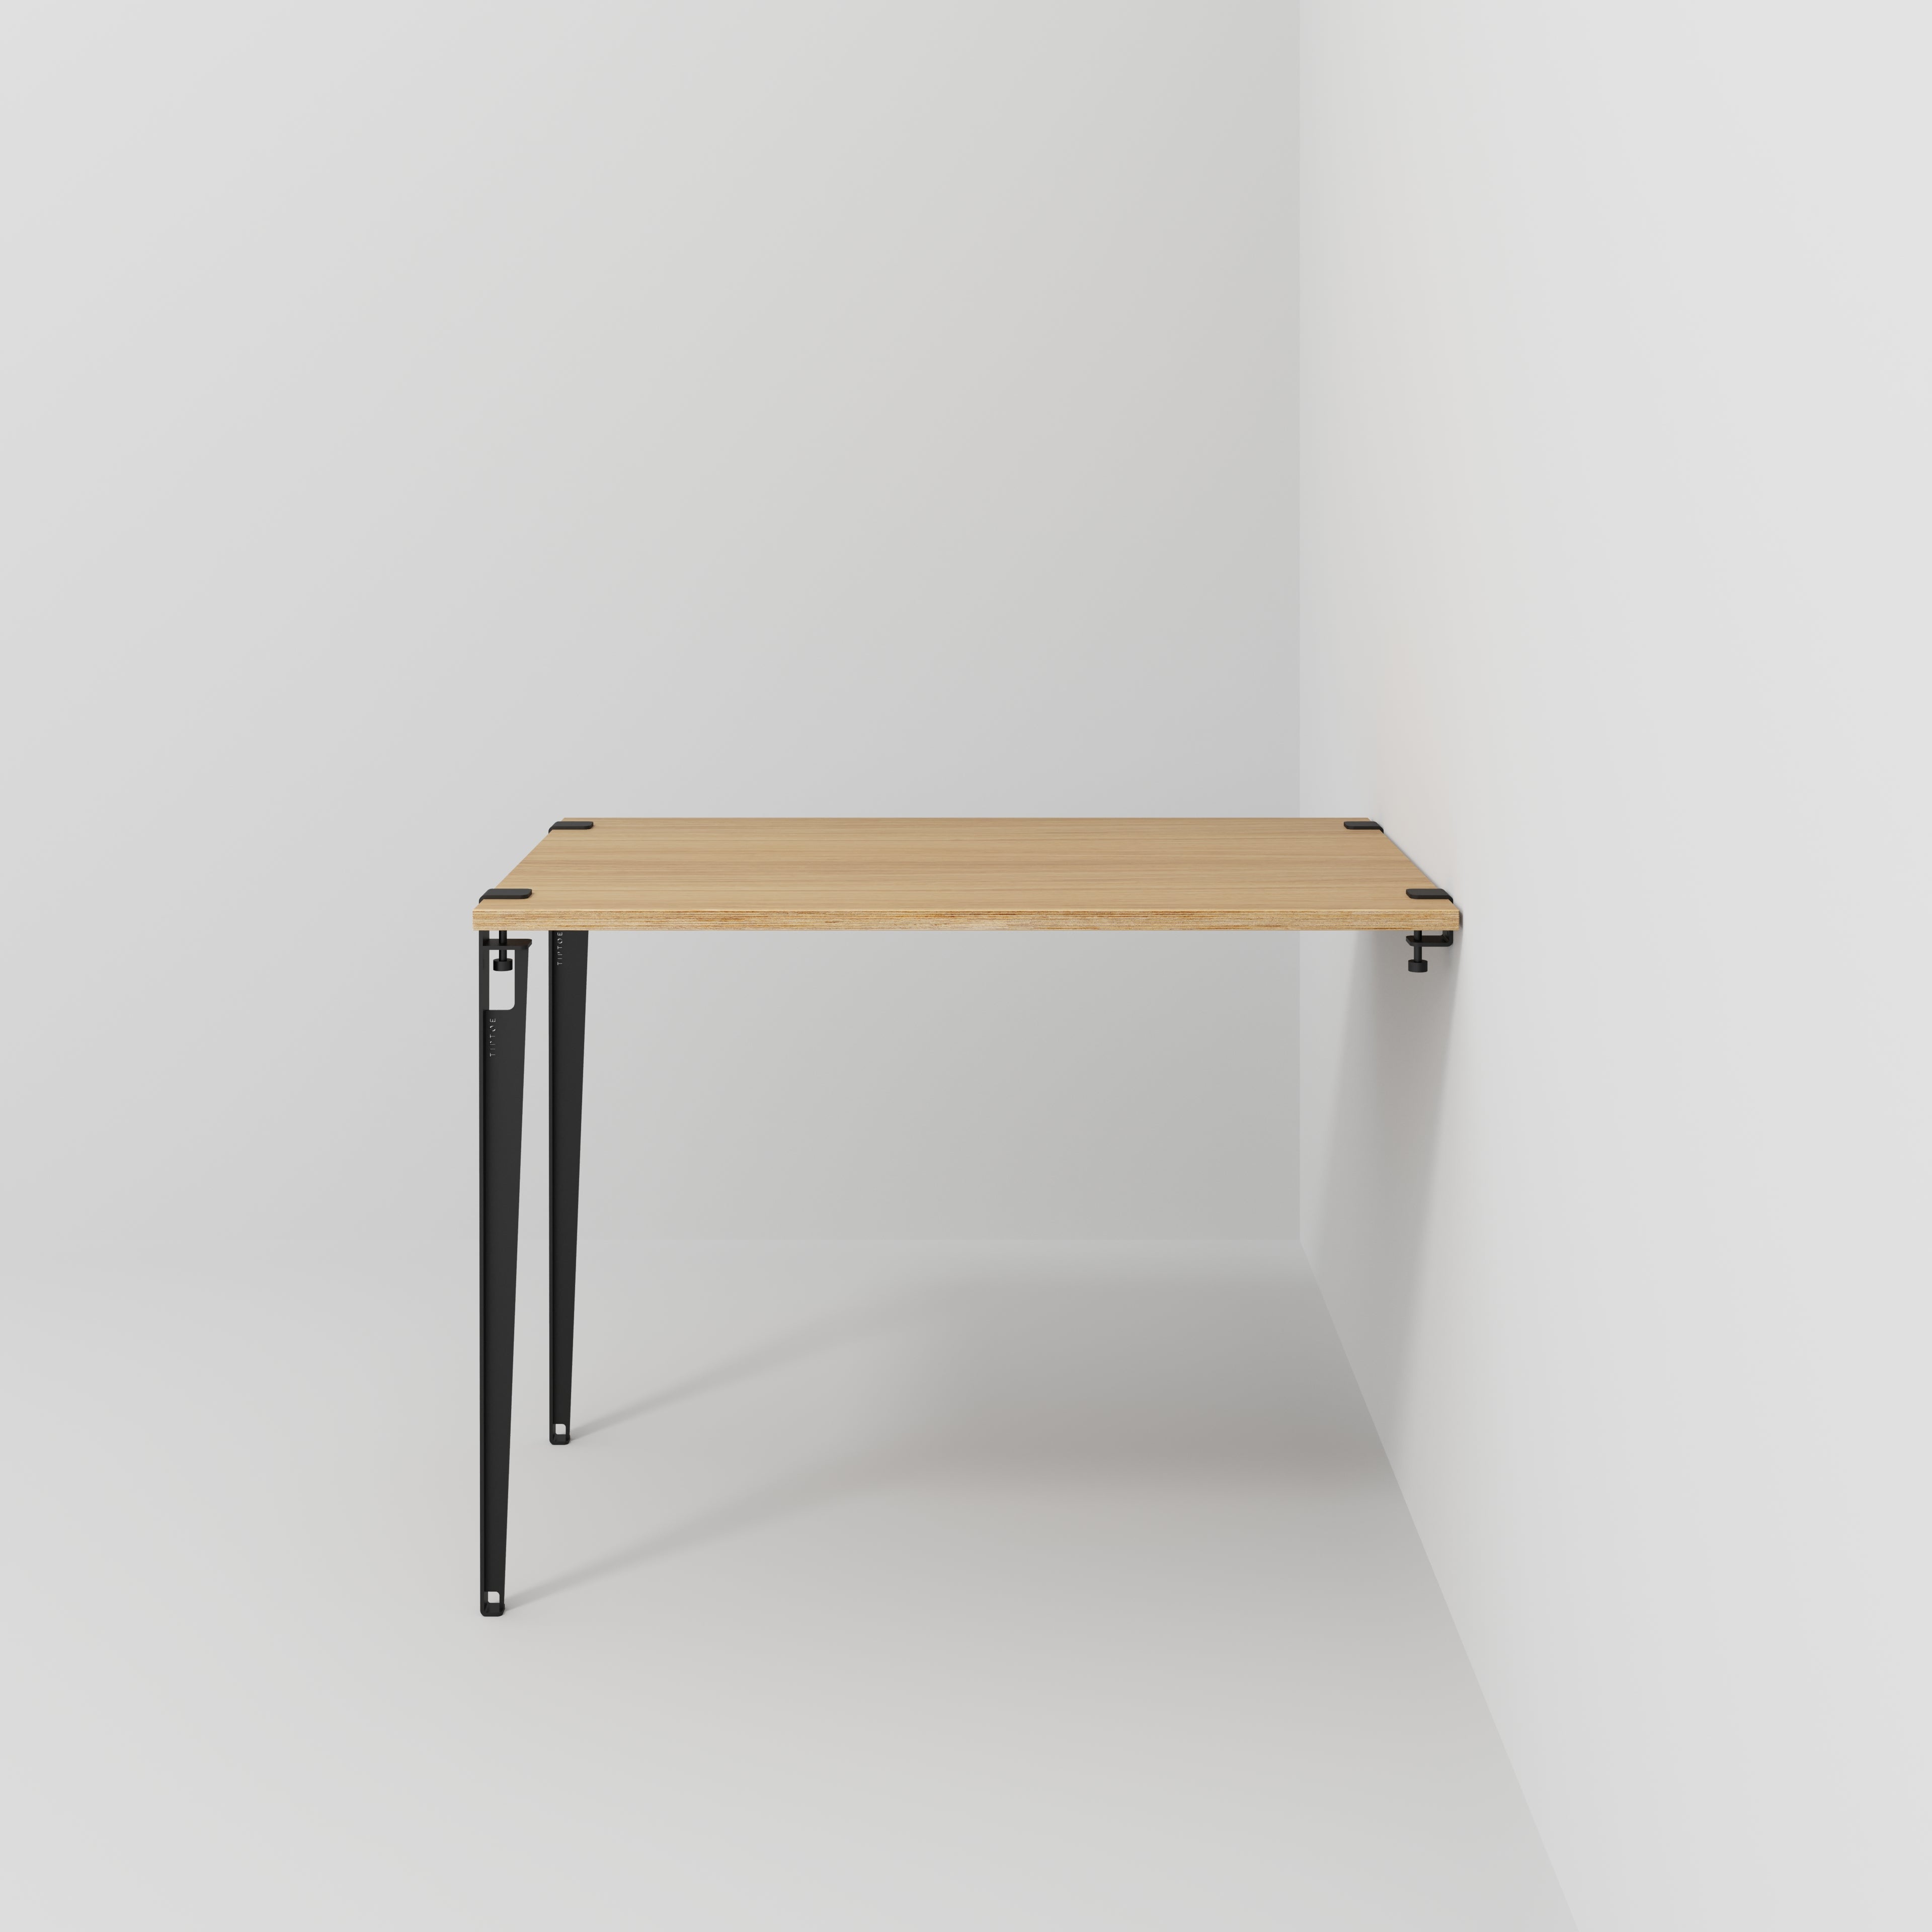 Wall Table with Black Tiptoe Legs and Brackets - Plywood Oak - 1200(w) x 800(d) x 900(h)